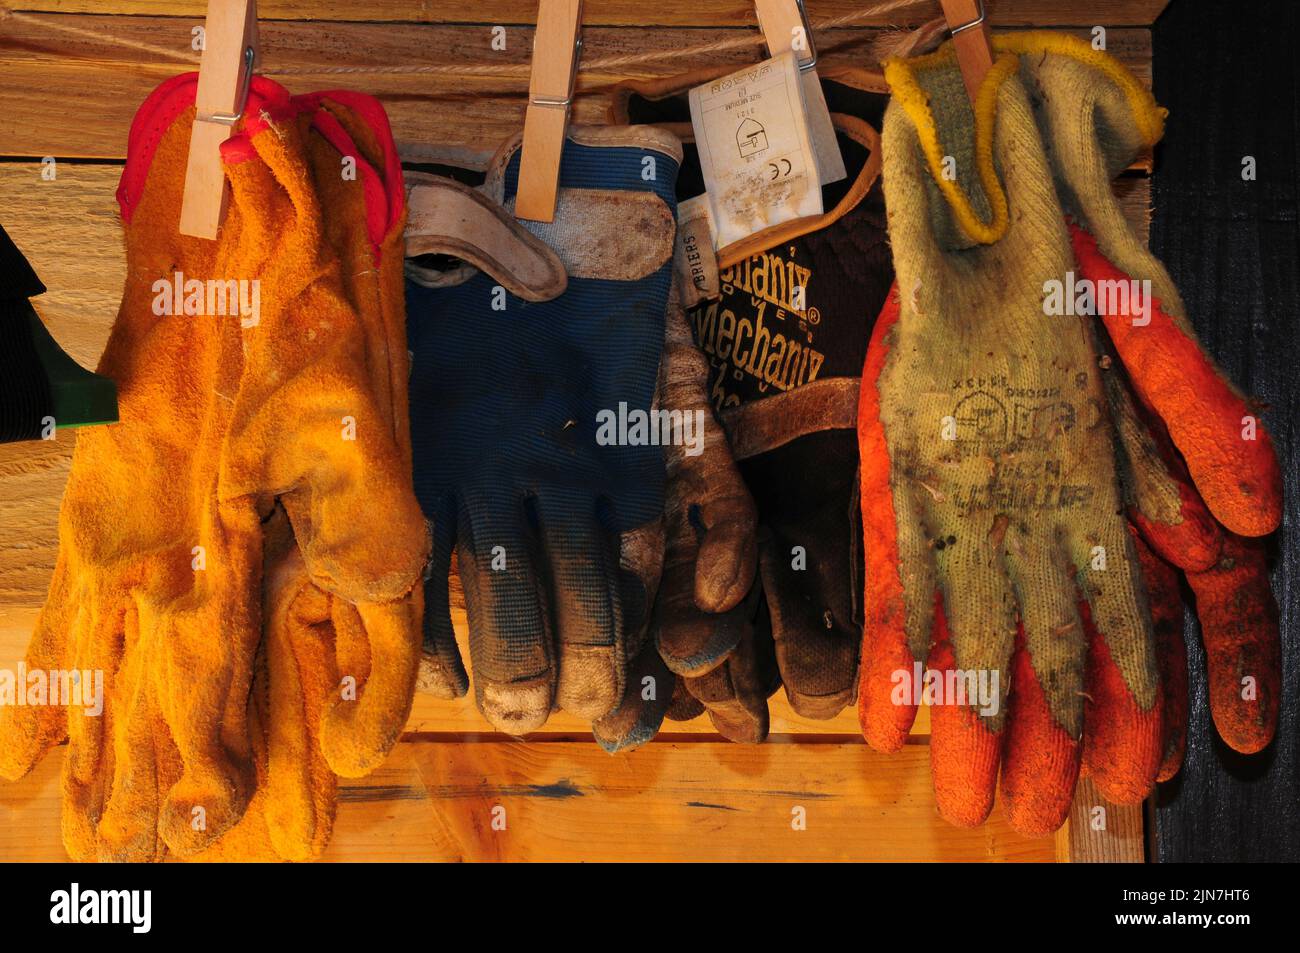 Assortment of gardening gloves pegged onto a string Stock Photo